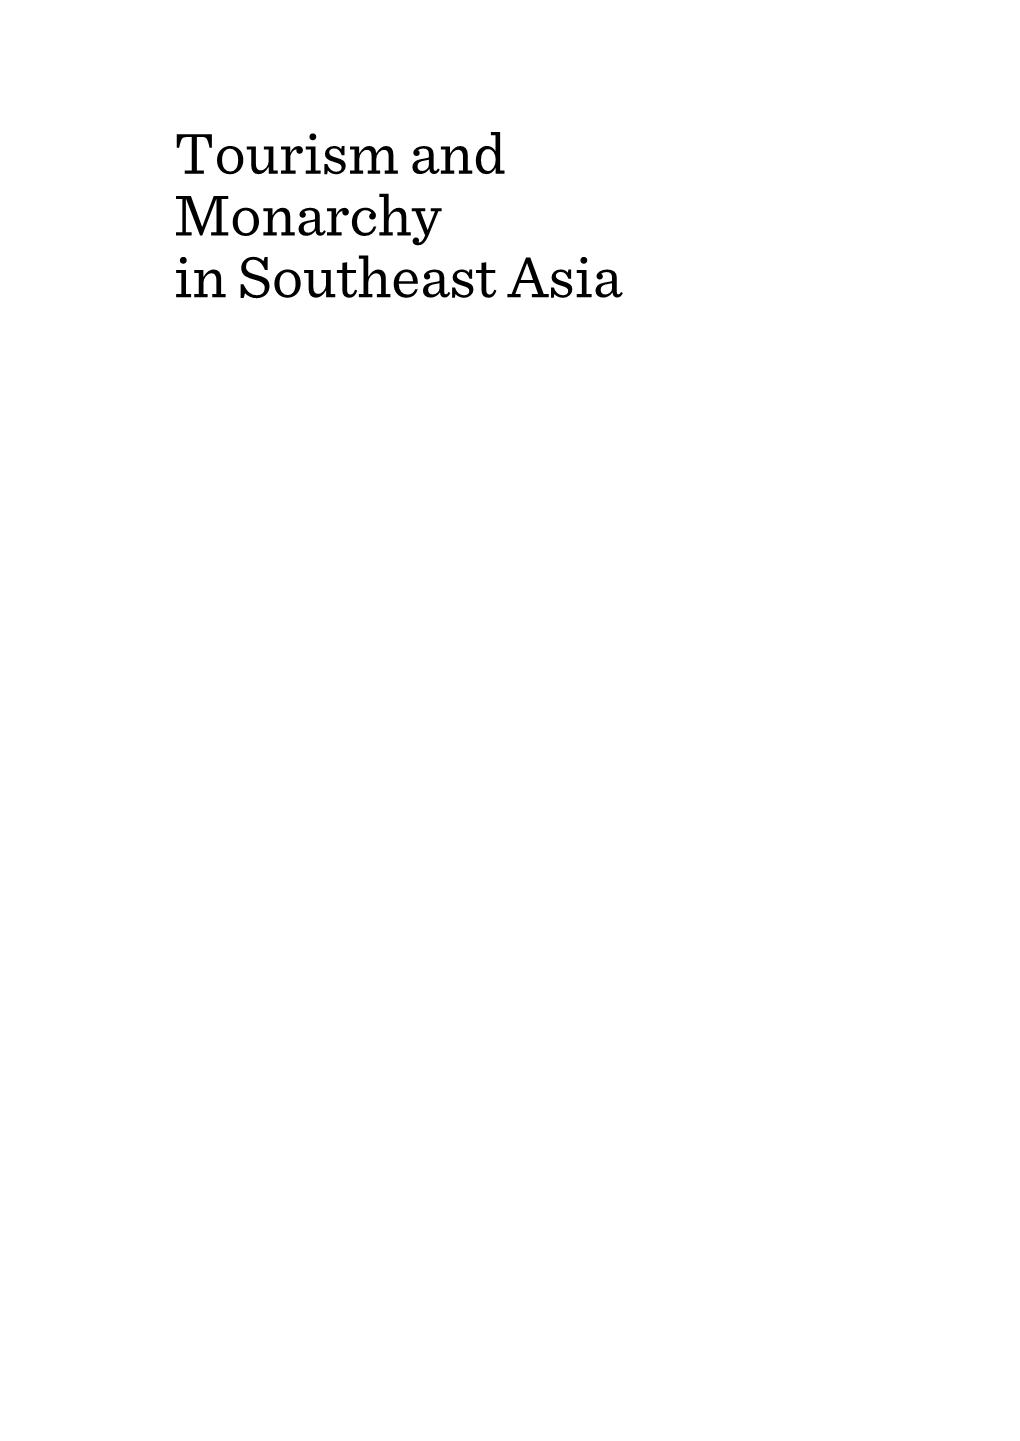 Tourism and Monarchy in Southeast Asia